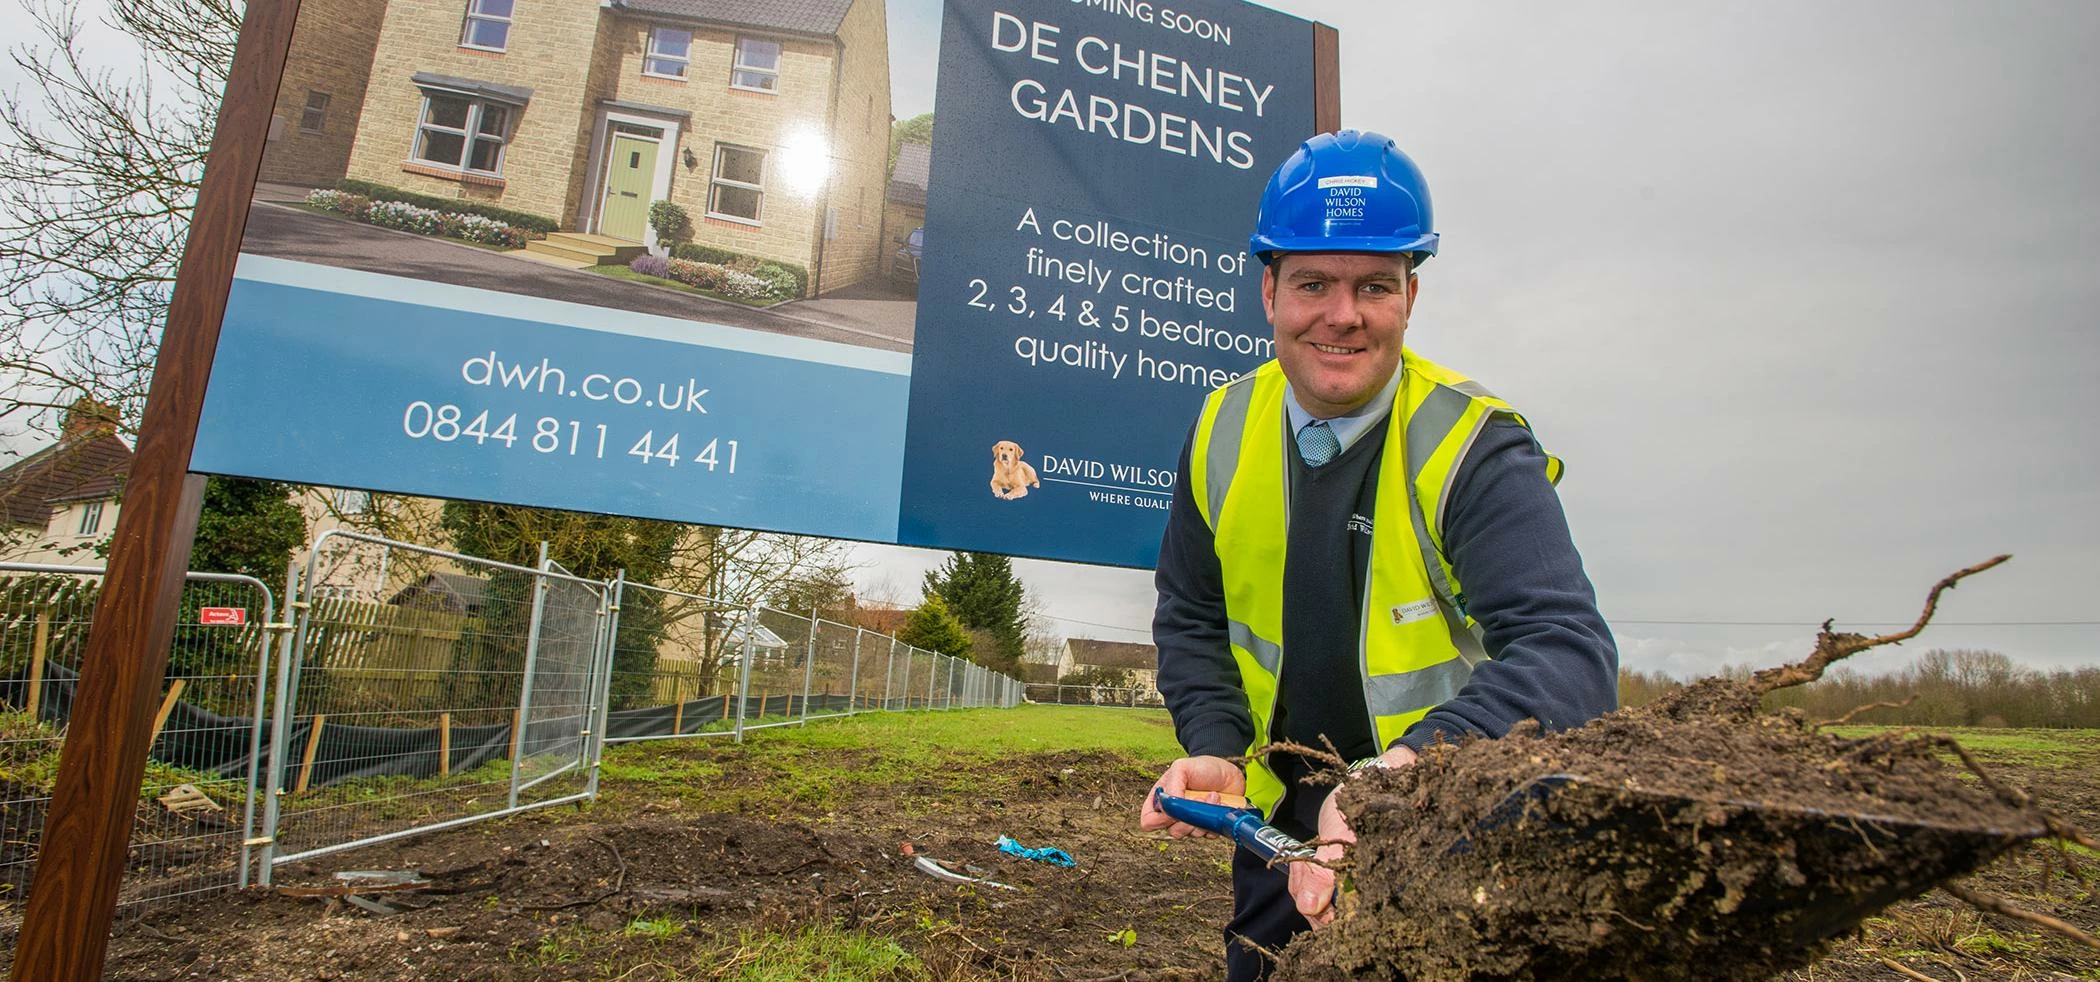 Chris Hickey from David Wilson Homes puts the first spade in the ground at De Cheney Gardens  